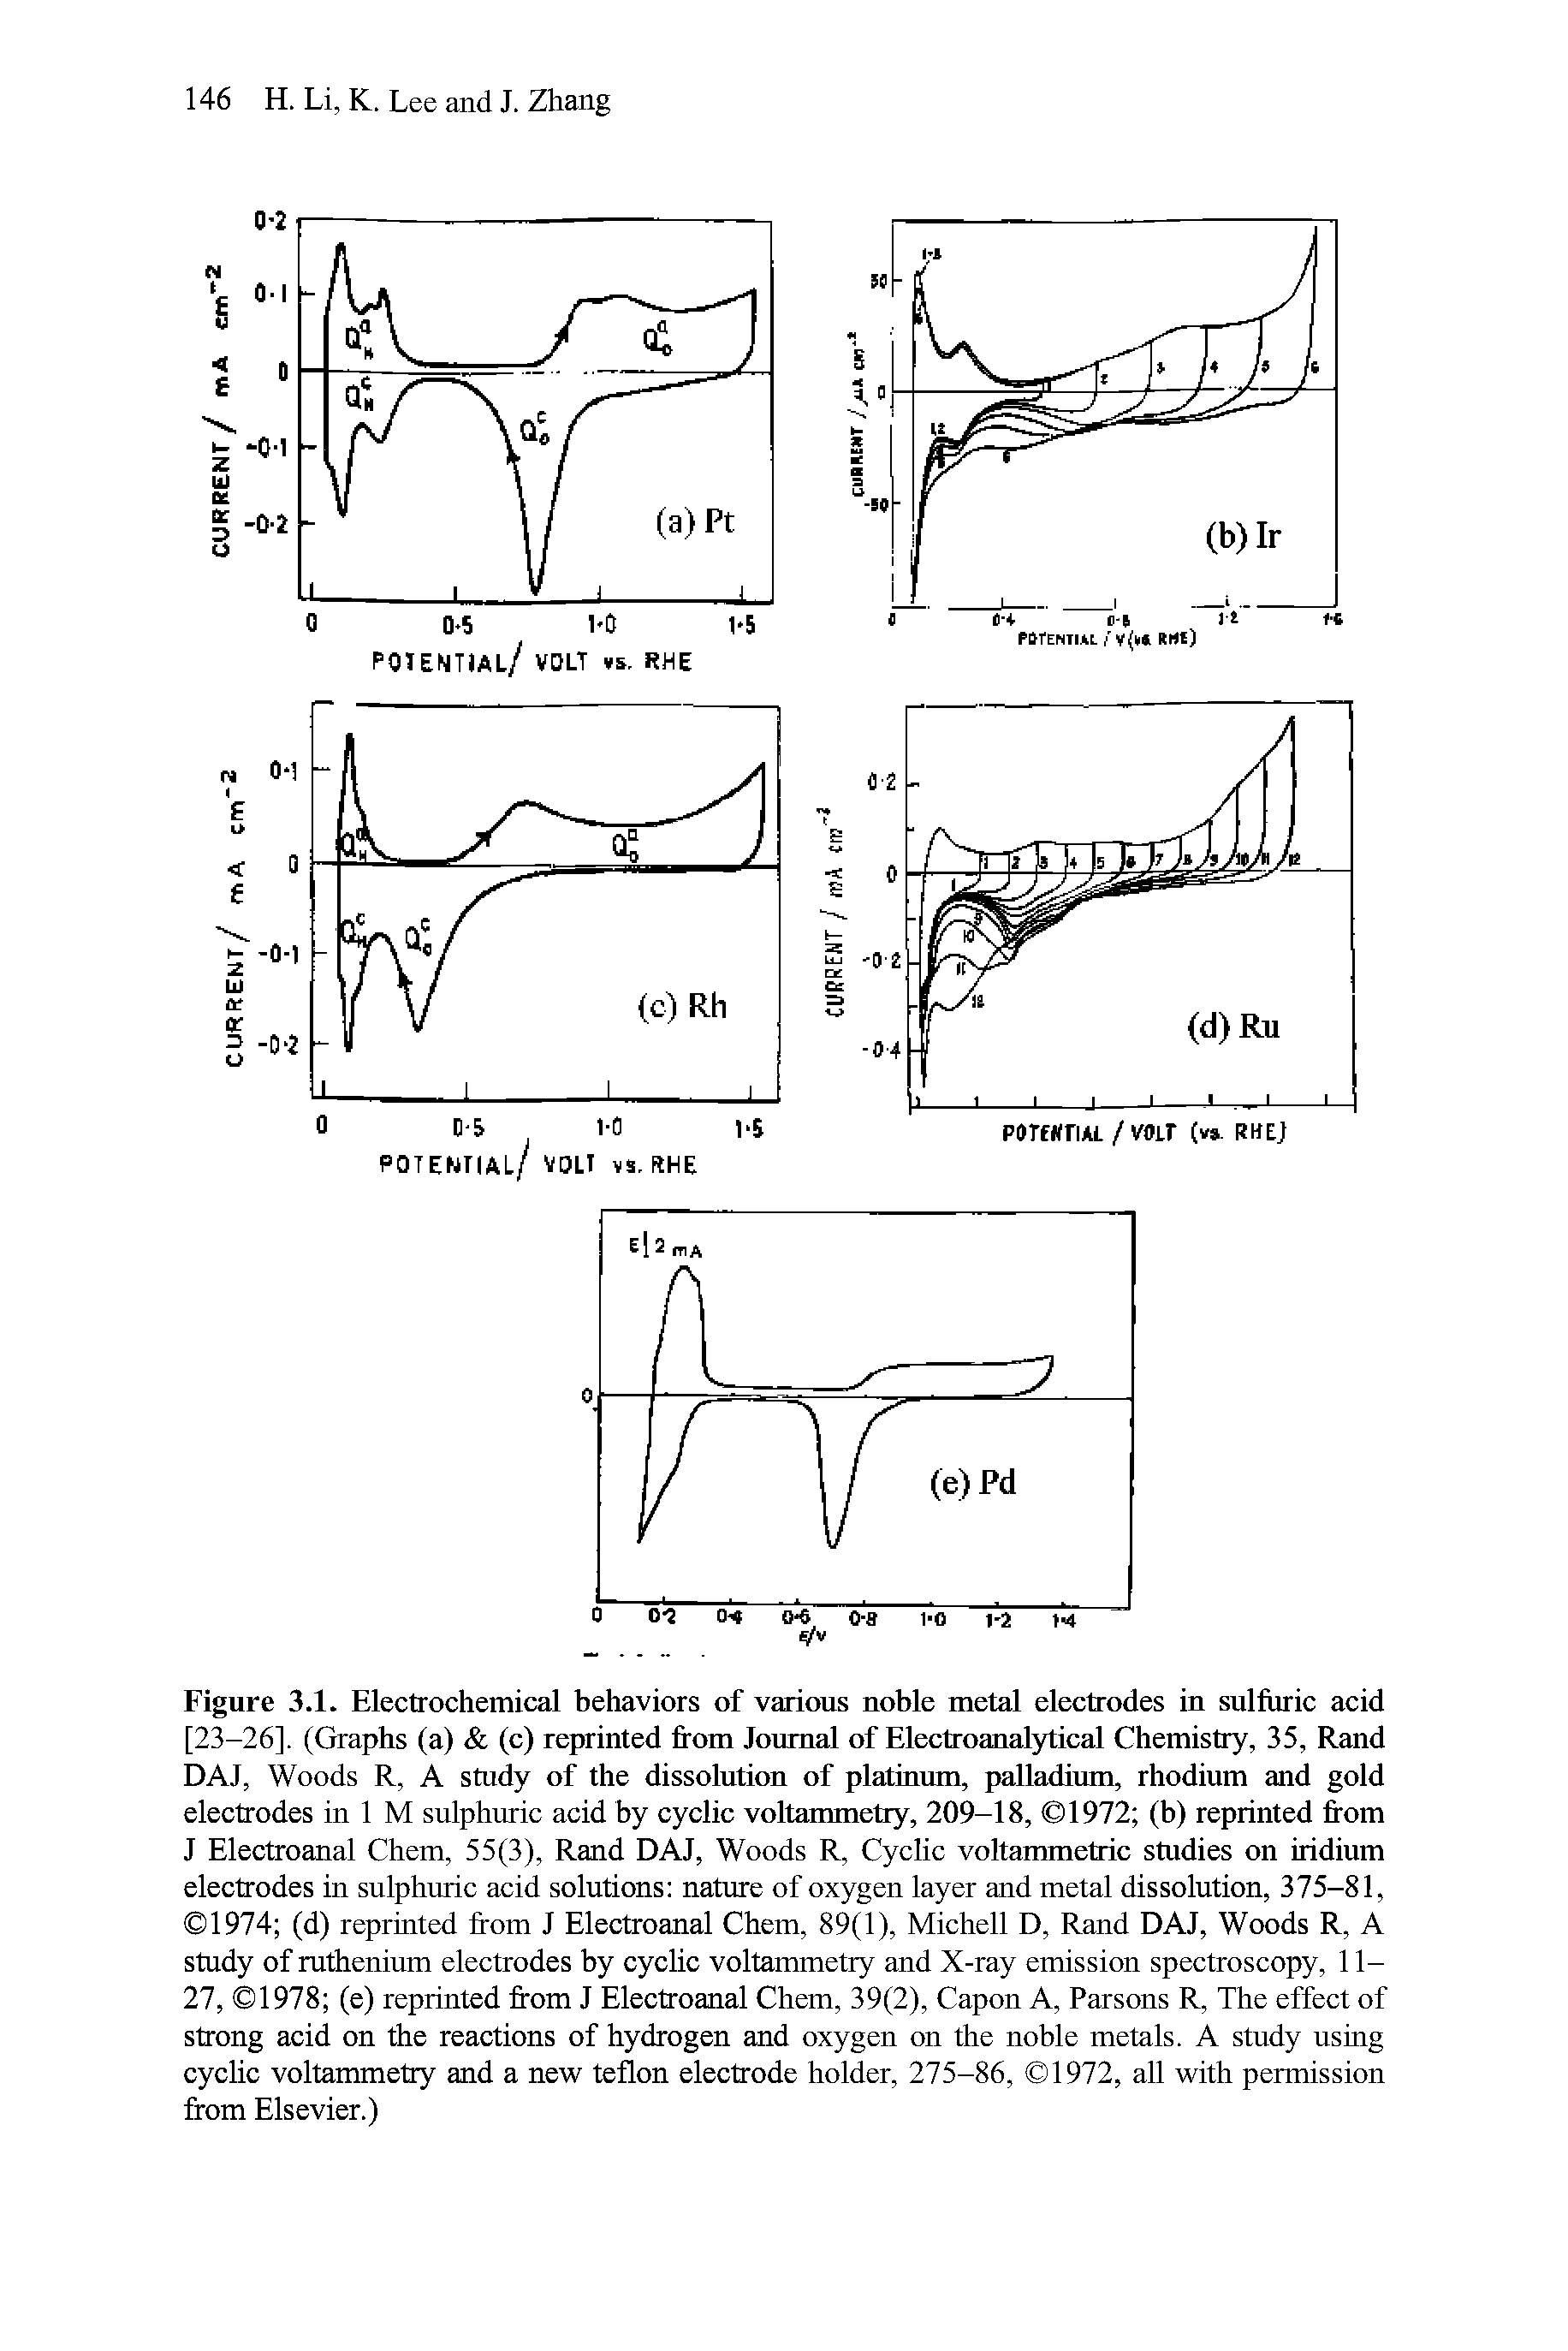 Figure 3.1. Electrochemical behaviors of various noble metal electrodes in sulfuric acid [23-26]. (Graphs (a) (c) reprinted from Journal of Electroanatytical Chemistry, 35, Rand DAJ, Woods R, A study of the dissolution of platinum, palladium, rhodium and gold electrodes in 1 M sulphuric acid by cyclic voltammetry, 209-18, 1972 (b) reprinted from J Electroanal Chem, 55(3), Rand DAJ, Woods R, Cyclic voltammetric studies on iridium electrodes in sulphuric acid solutions nature of oxygen layer and metal dissolution, 375-81, 1974 (d) reprinted from J Electroanal Chem, 89(1), Michell D, Rand DAJ, Woods R, A study of ruthenium electrodes by cyclic voltammetry and X-ray emission spectroscopy, 11-27, 1978 (e) reprinted from J Electroanal Chem, 39(2), Capon A, Parsons R, The effect of strong acid on the reactions of hydrogen and oxygen on the noble metals. A study using cyclic voltammetry and a new teflon electrode holder, 275-86, 1972, all with permission from Elsevier.)...